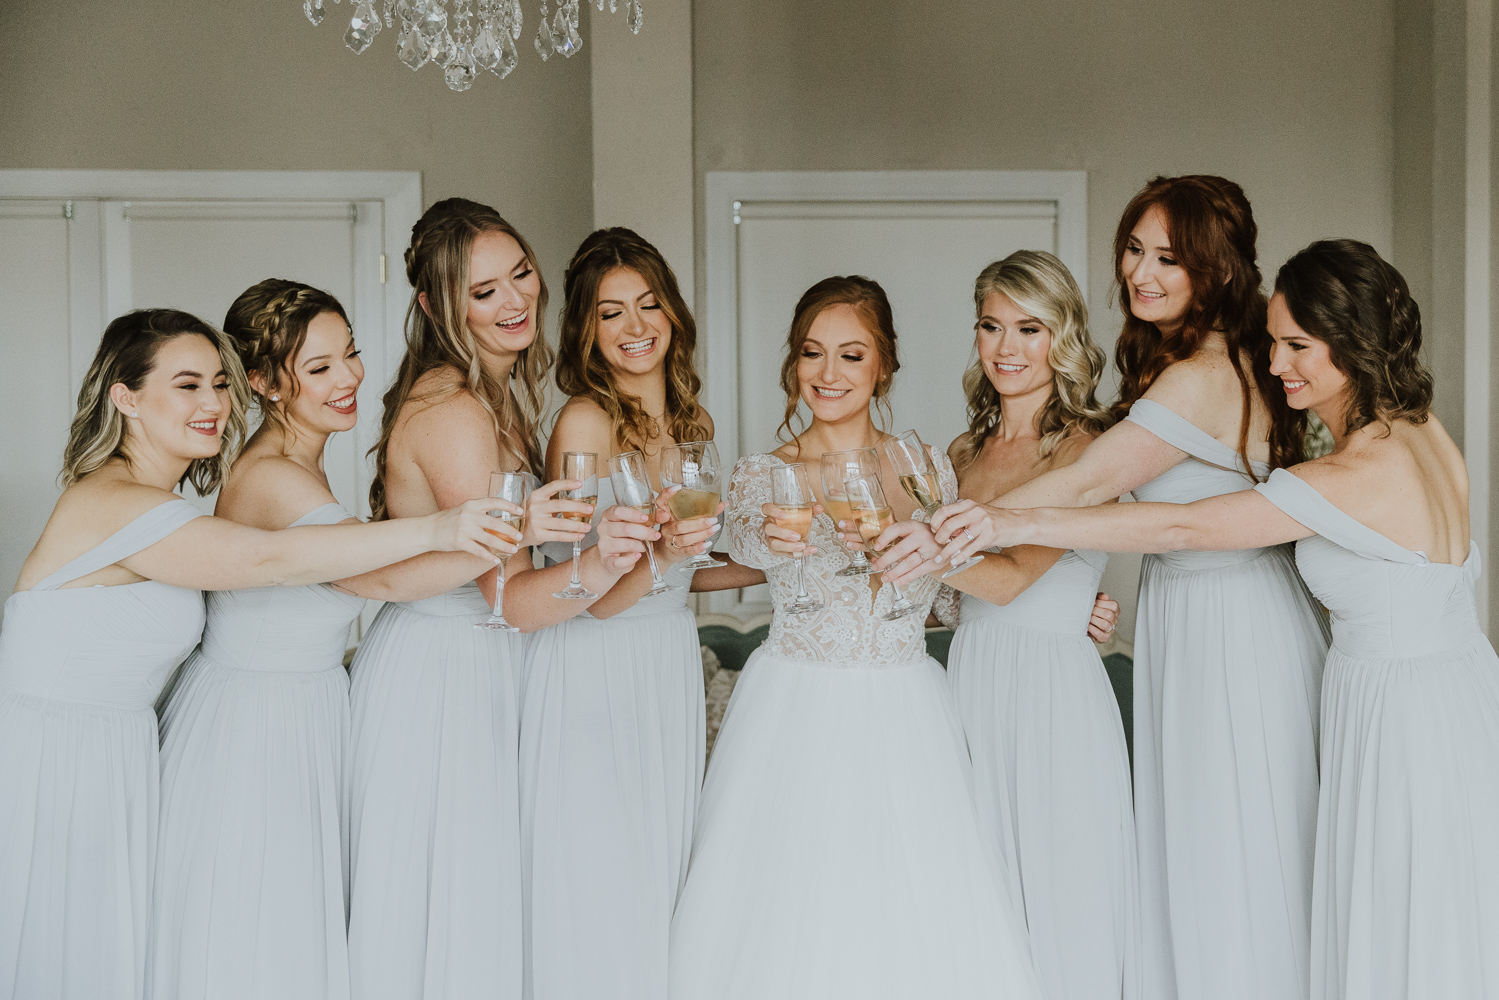 bride and bridesmaids cheersing together